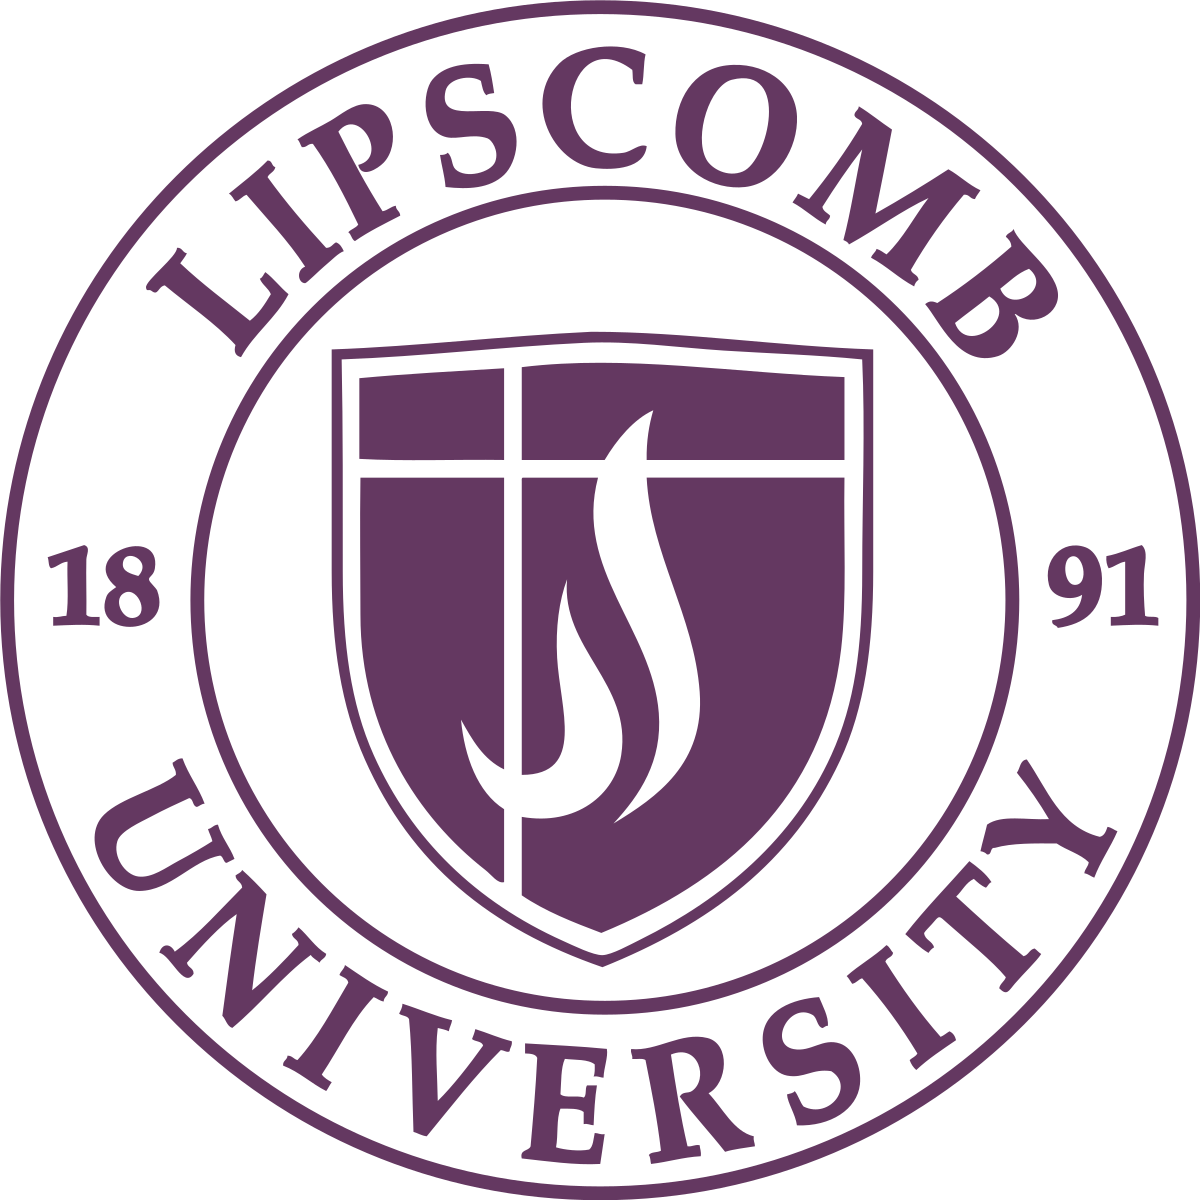 1200px-Lipscomb_Seal.svg.png